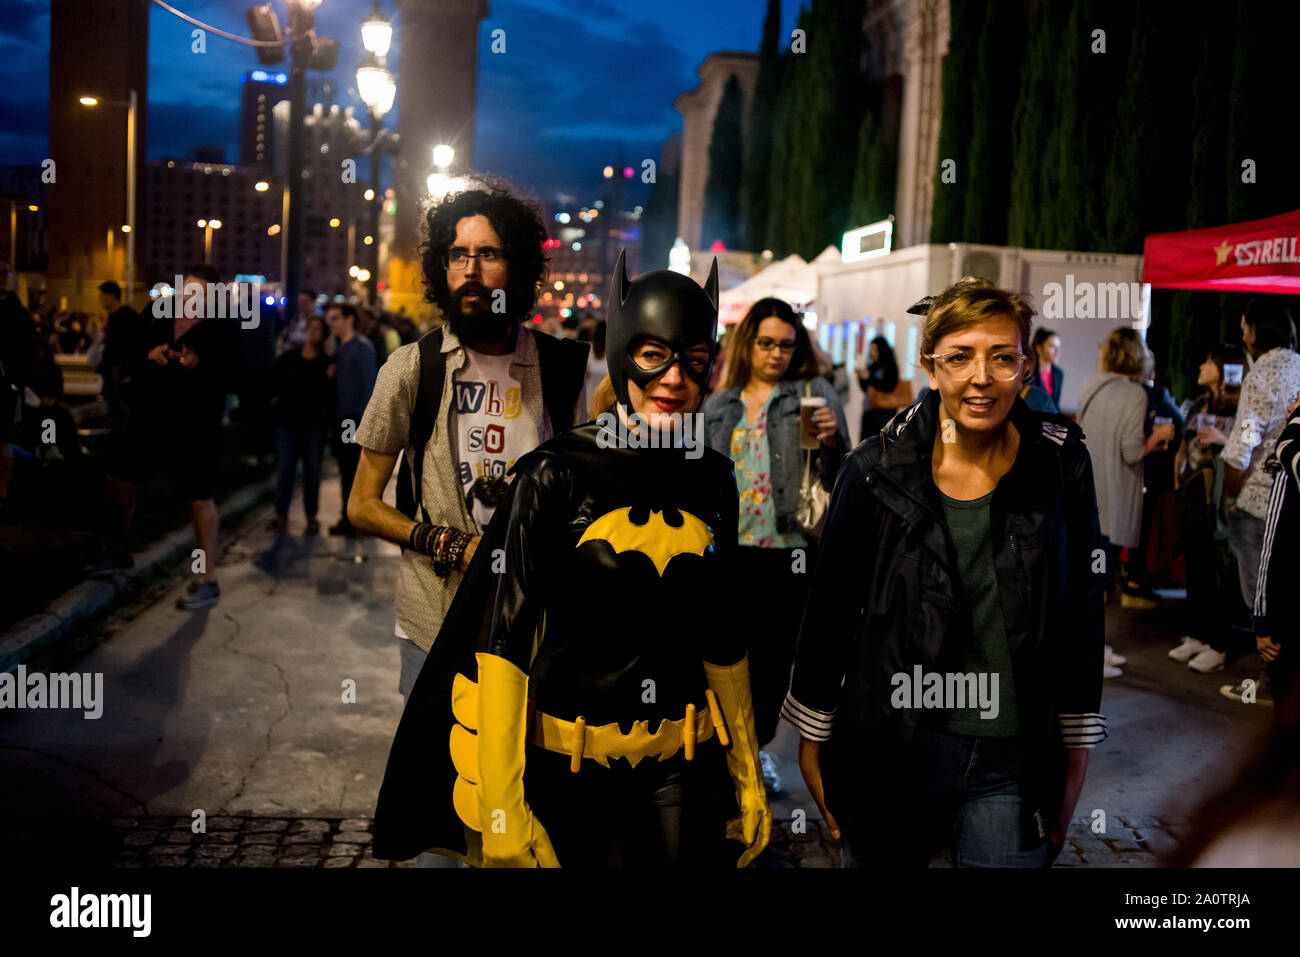 A woman goes dressed as Batman in Barcelona on occasion of the character’s 80th anniversary. Stock Photo